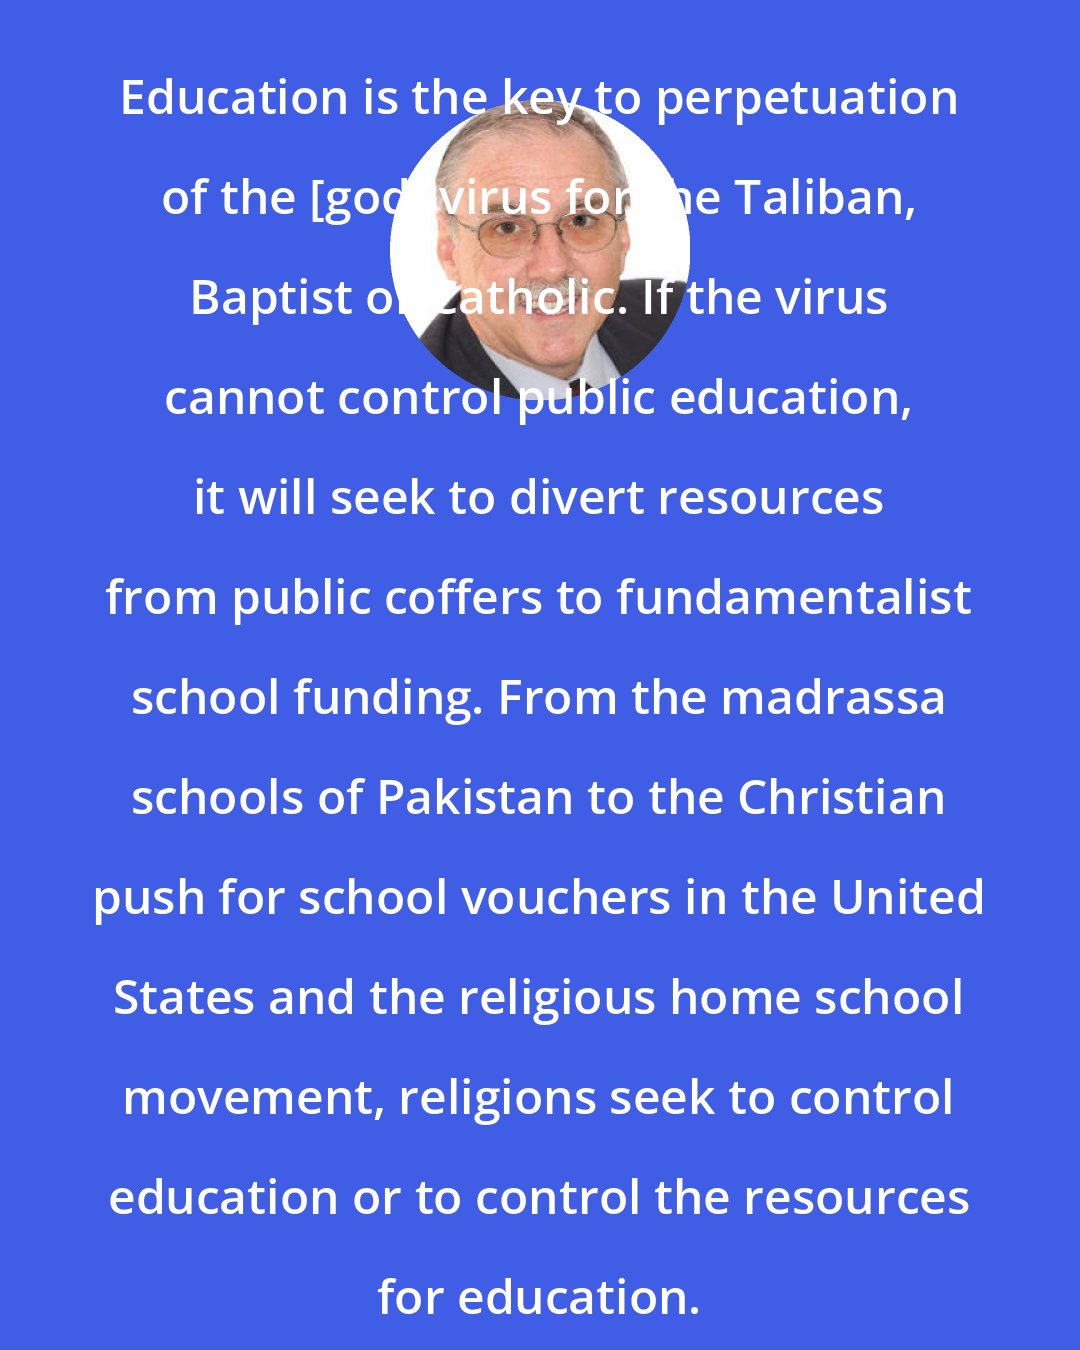 Darrel Ray: Education is the key to perpetuation of the [god] virus for the Taliban, Baptist or Catholic. If the virus cannot control public education, it will seek to divert resources from public coffers to fundamentalist school funding. From the madrassa schools of Pakistan to the Christian push for school vouchers in the United States and the religious home school movement, religions seek to control education or to control the resources for education.